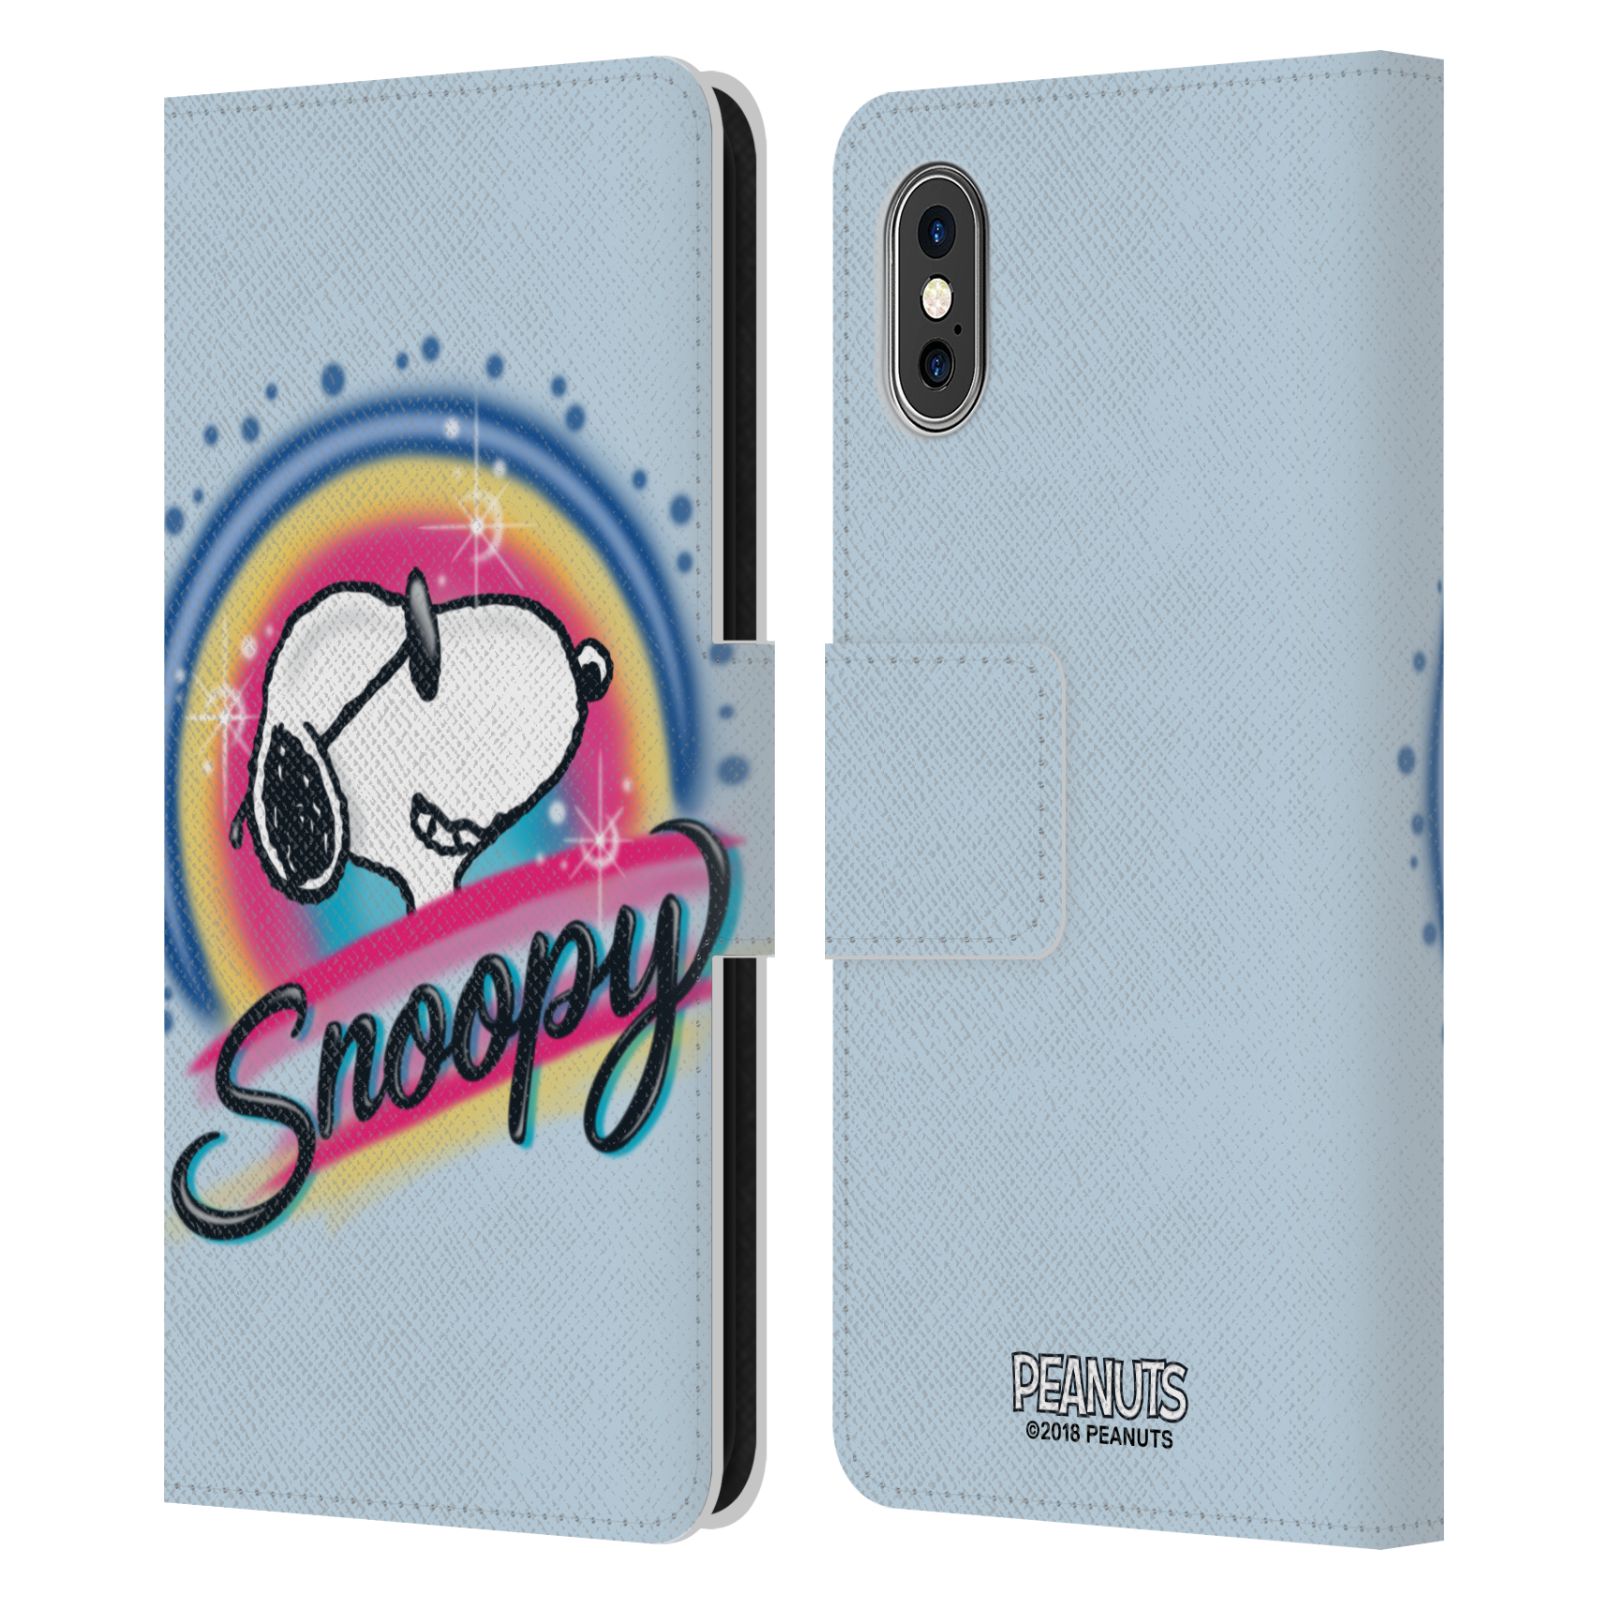 Pouzdro na mobil Apple Iphone X / XS - HEAD CASE - Peanuts Snoopy Superstar 2